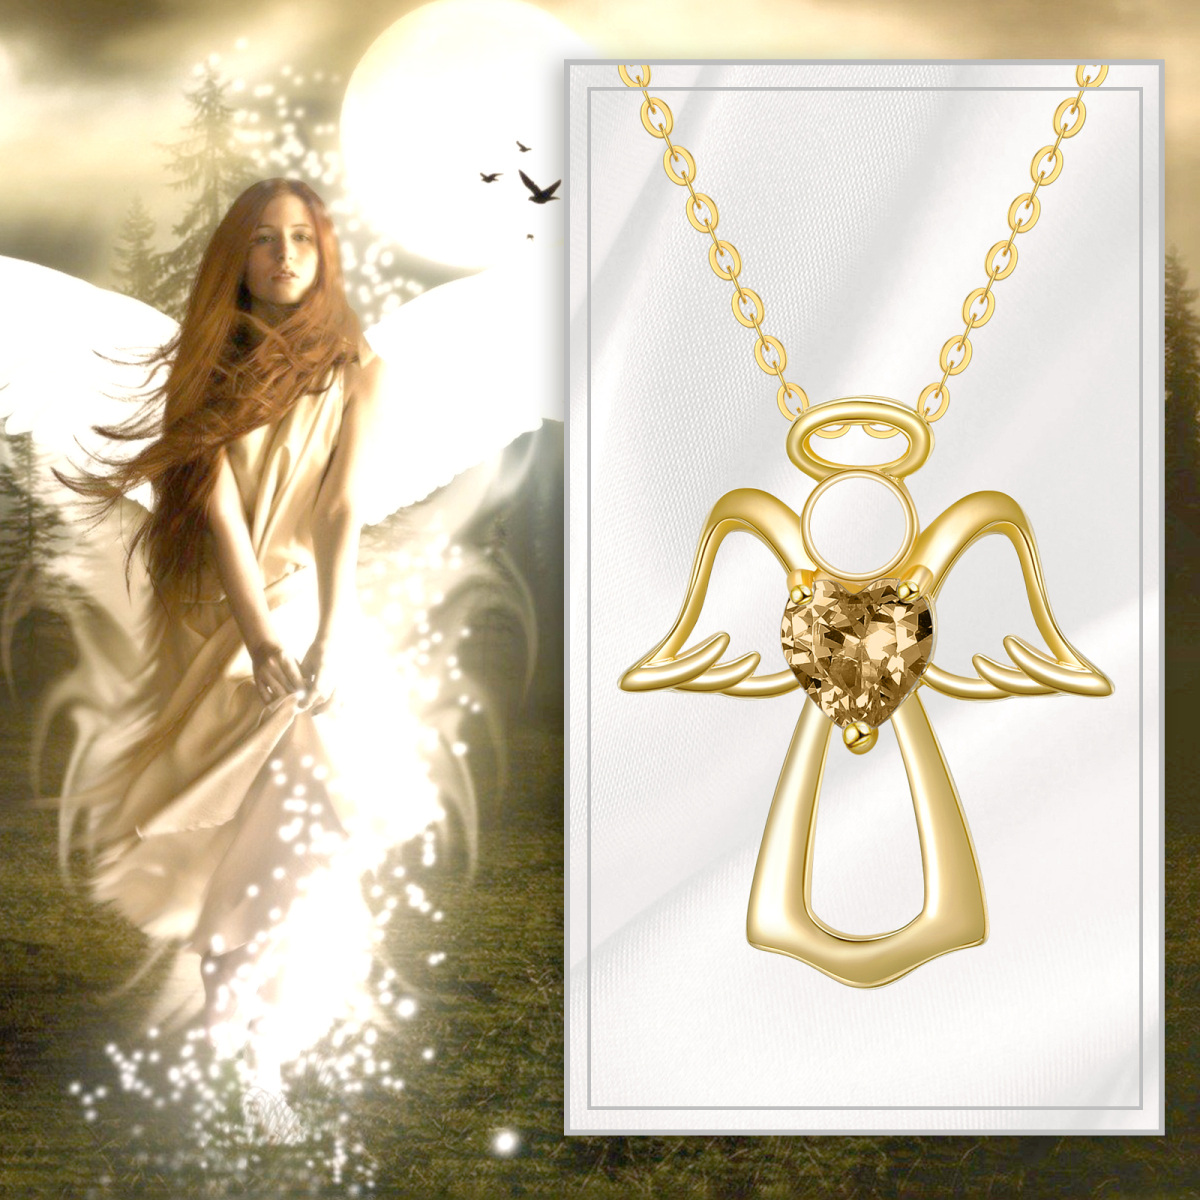 14K Gold Heart Crystal Angel Wing & Heart Pendant Necklace-6